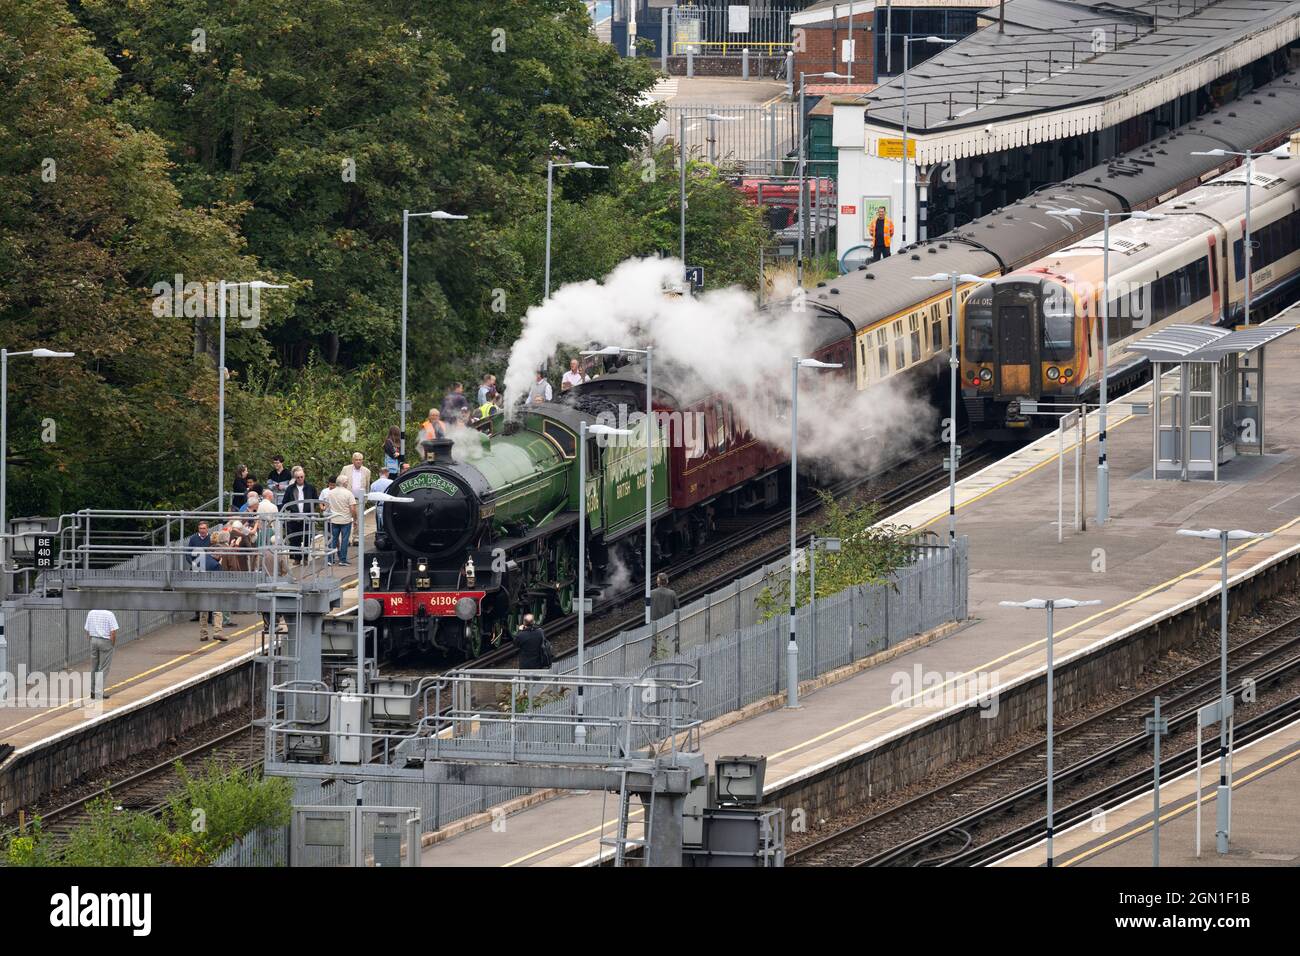 The Mayflower 61306 B1 steam locomotive painted in the early British Railways apple green livery, with passengers at Basingstoke train station, UK Stock Photo